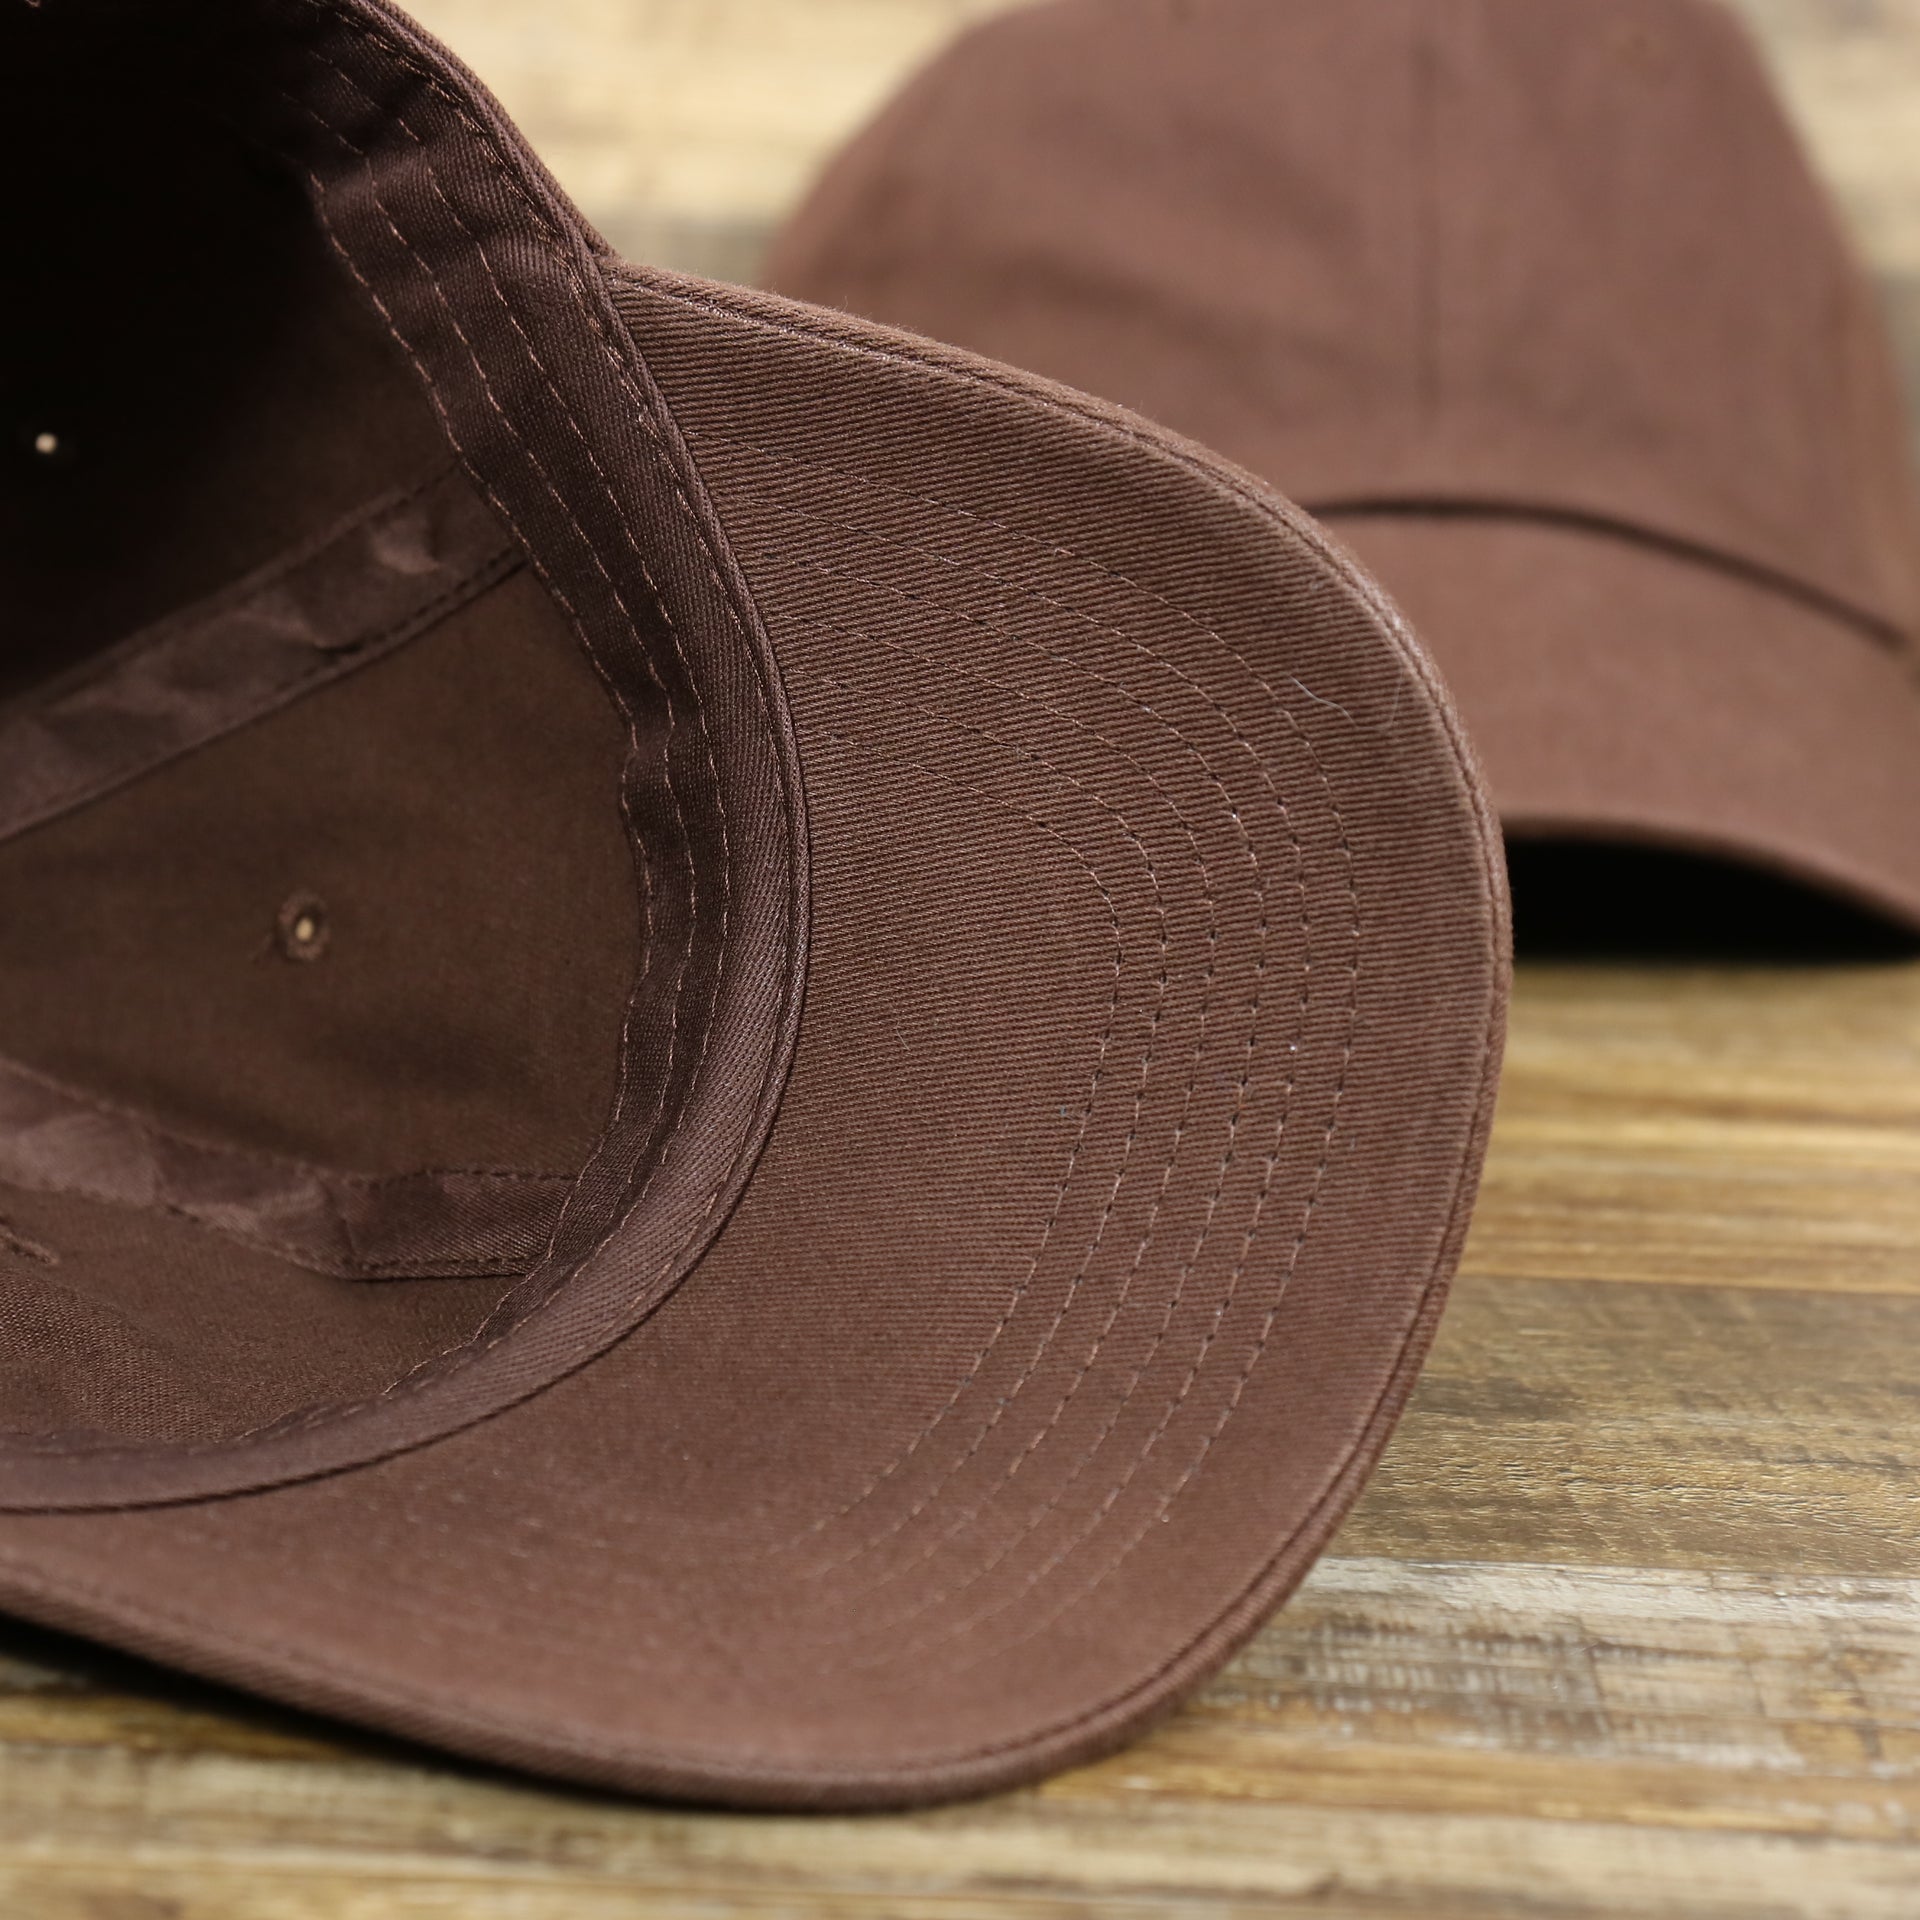 The undervisor on the Chocolate Bent Brim Blank Baseball Hat | Brown Dad Hat